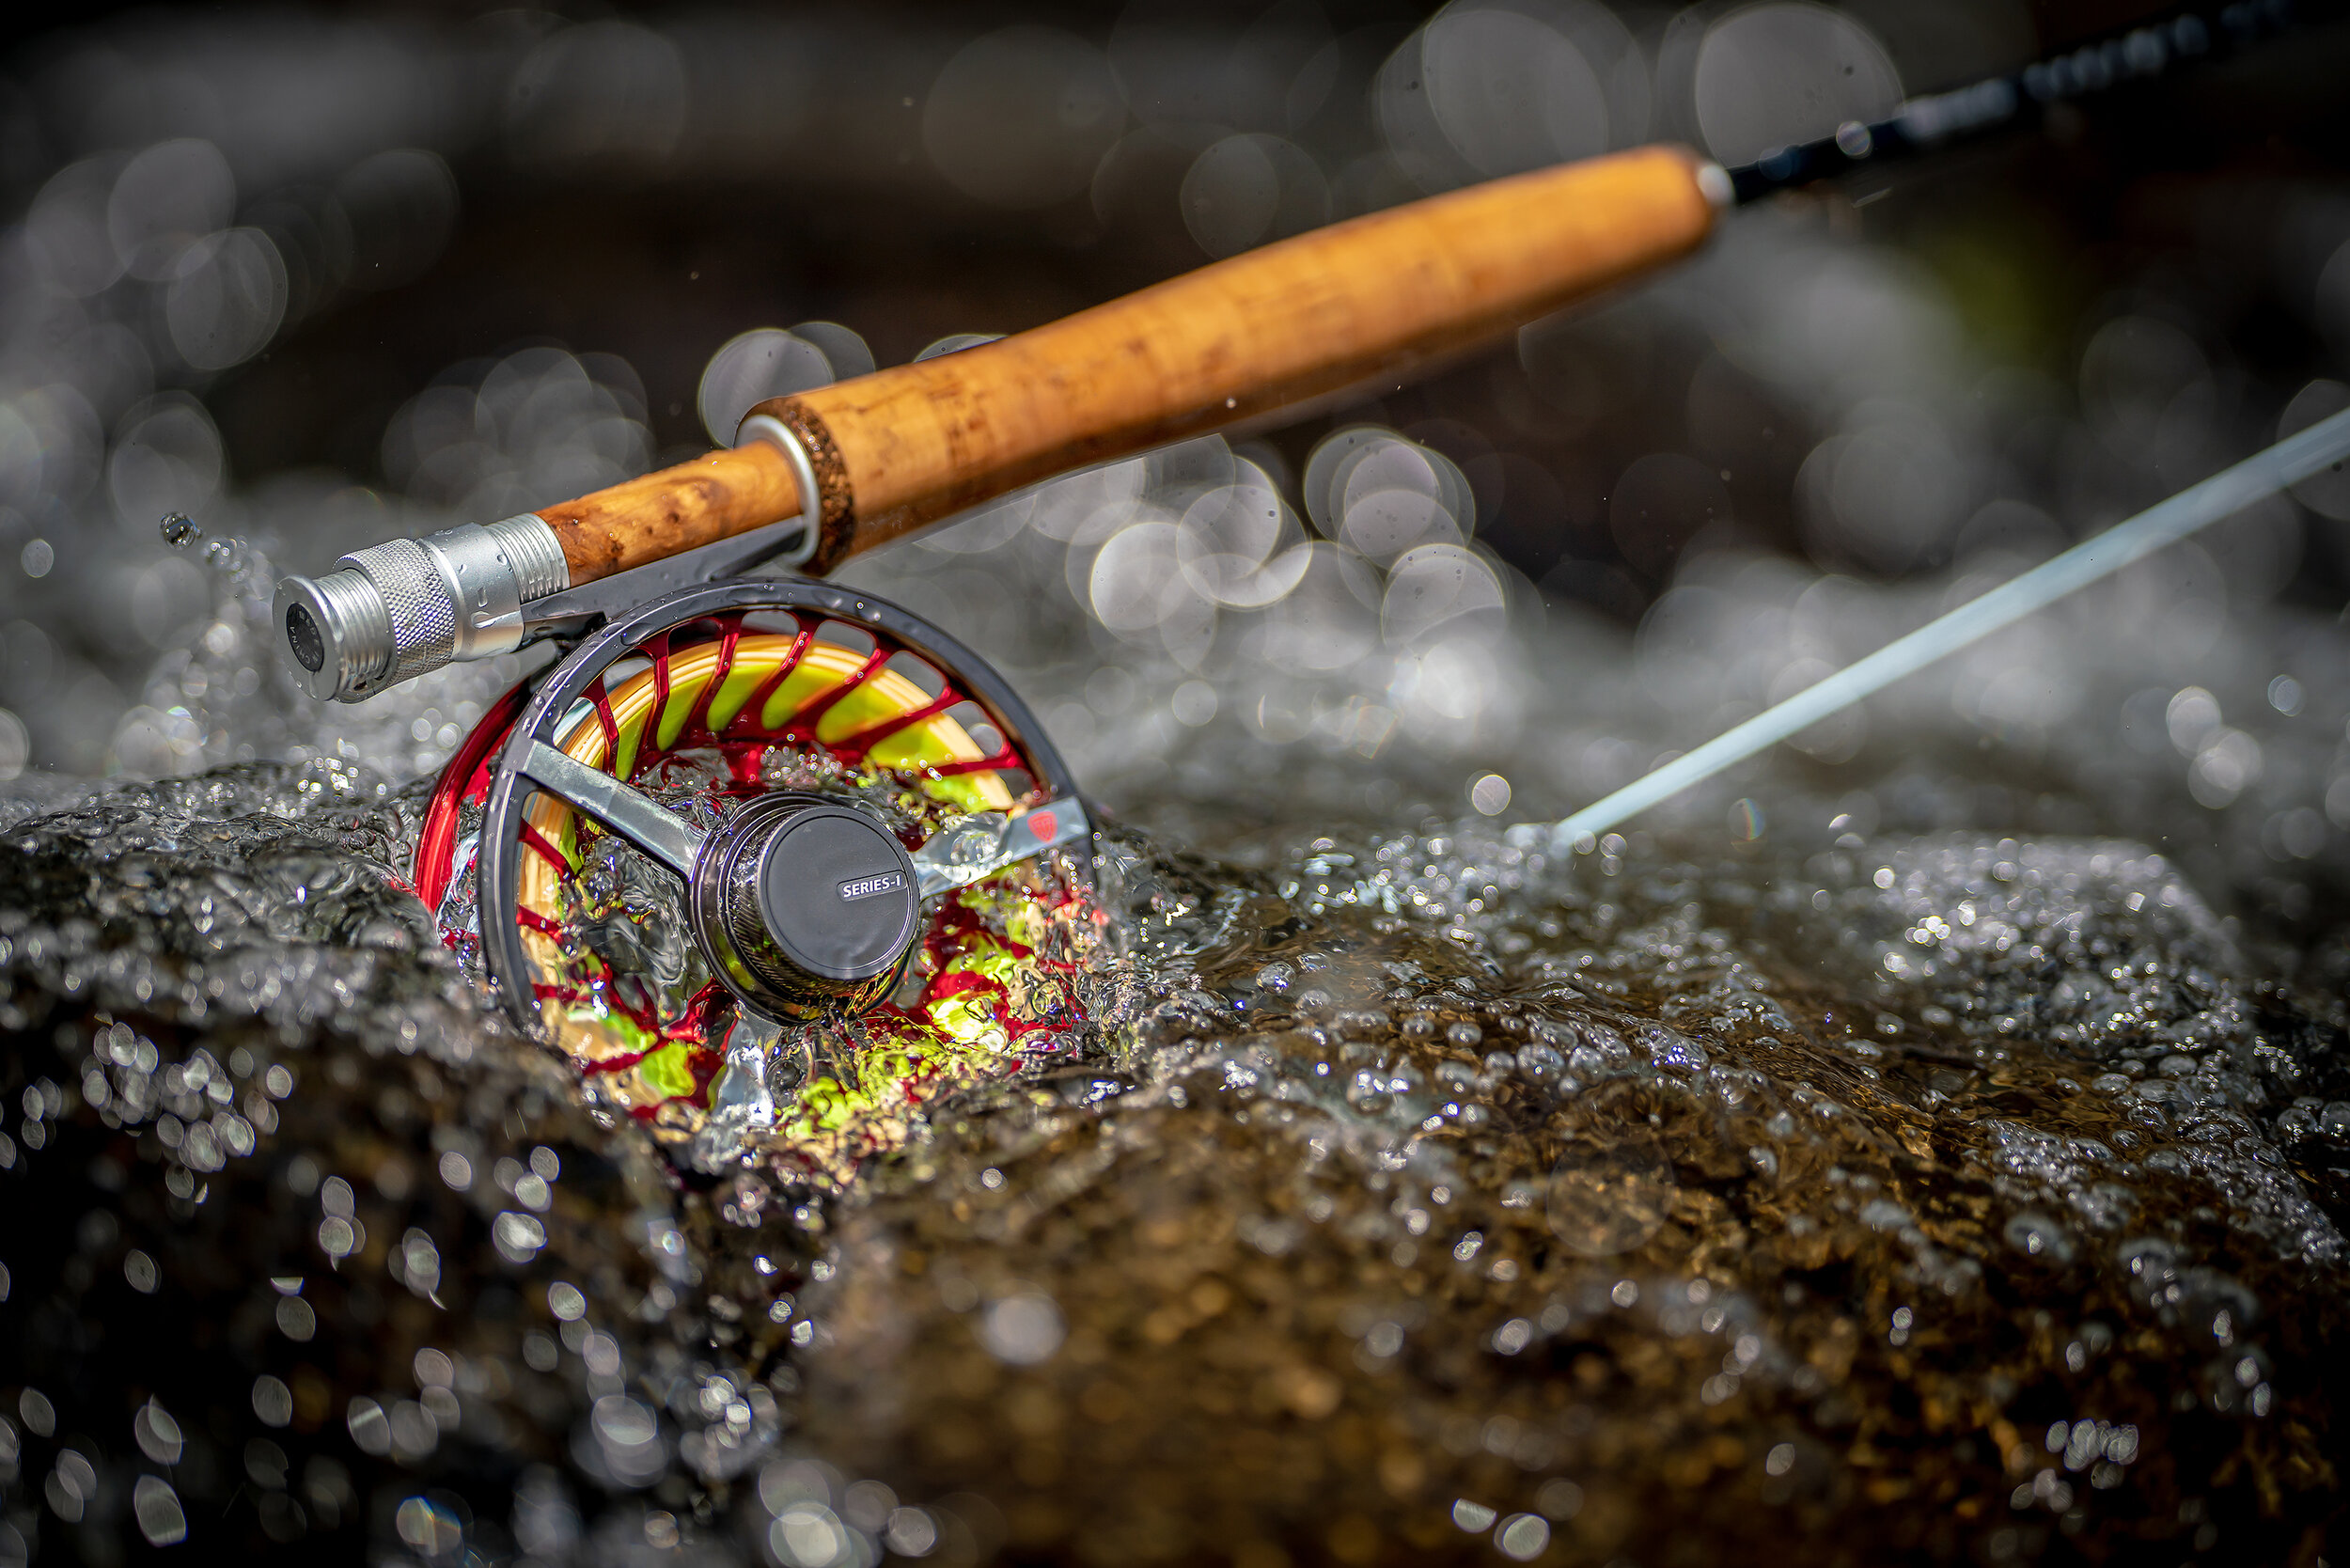 SERIES-1 — Taylor Fly Fishing